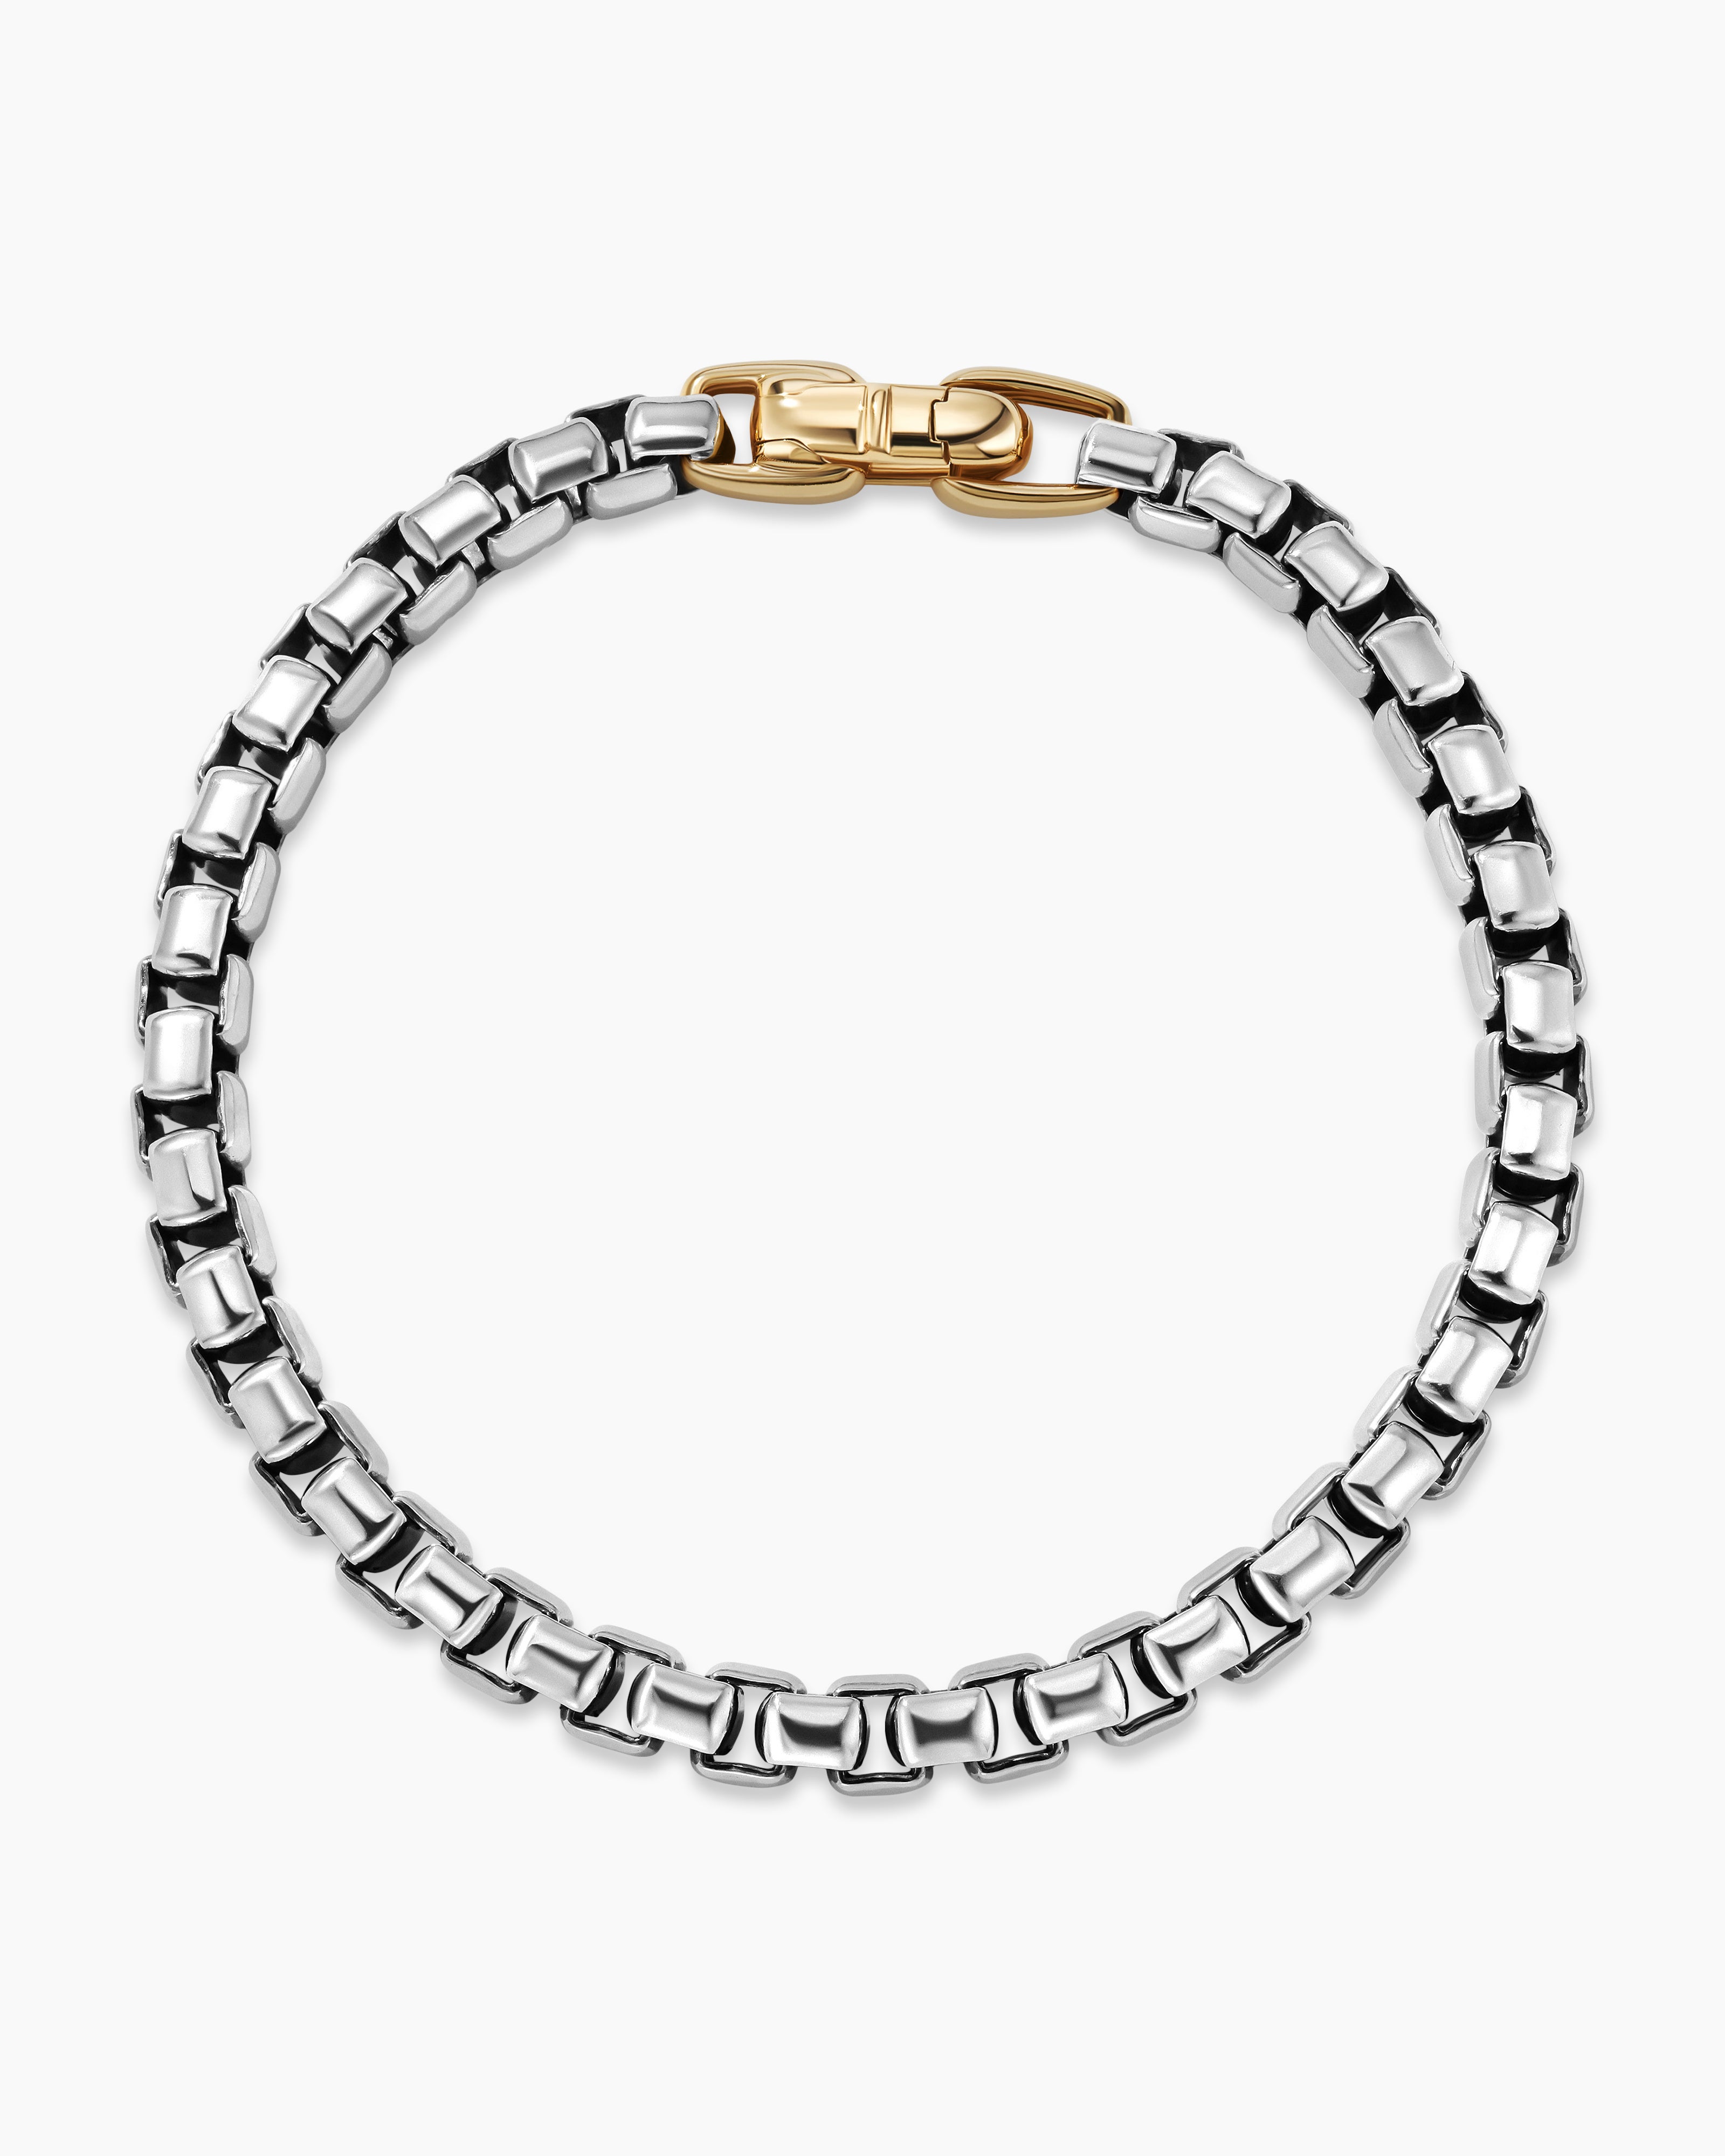 DY David Bracelet 6mm with | in Aire Yurman Silver Bel Yellow Gold, Box 14K Chain Sterling